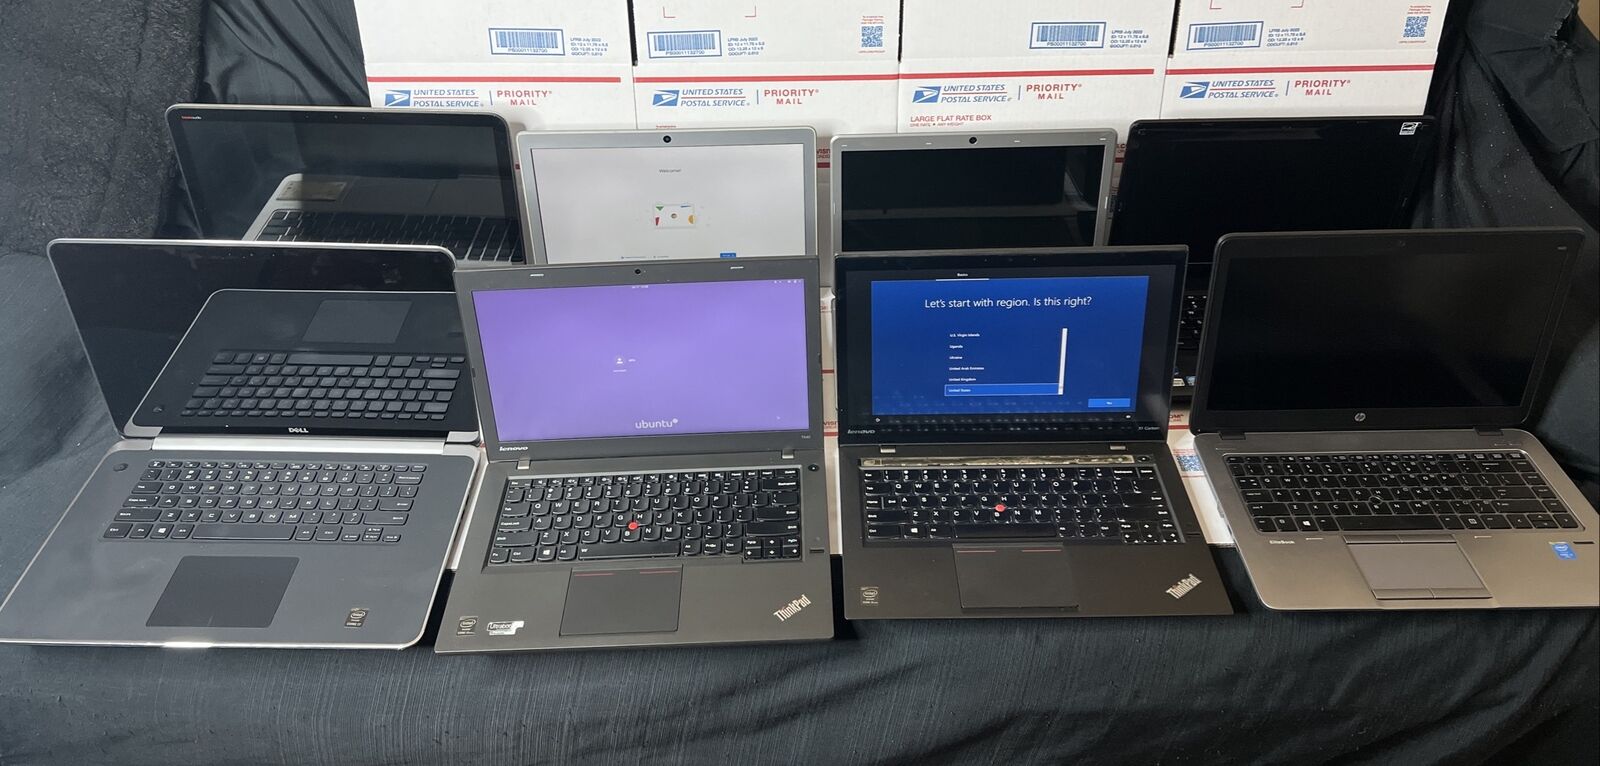 Lot of 8 ASSORTED Laptops- Acer ,HP,Lenovo - i7, i5,i3, Intel,  -AS IS/UNTESTED